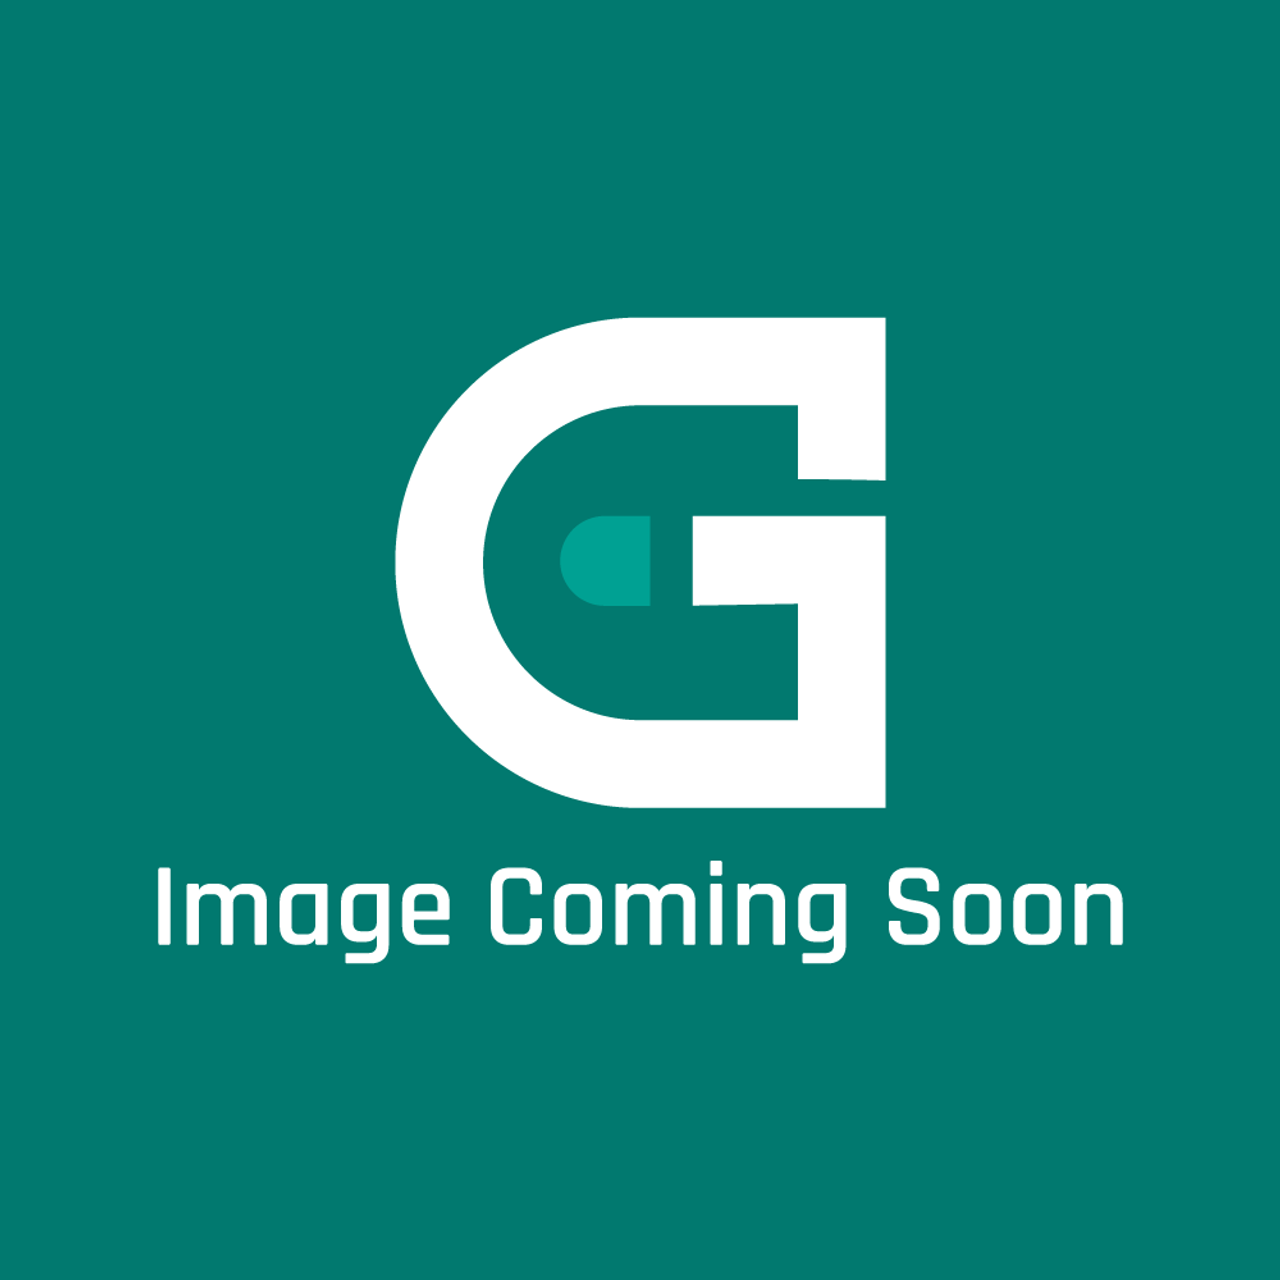 GE Appliances WB07K10380 - Support Outer Glass Lf - Image Coming Soon!